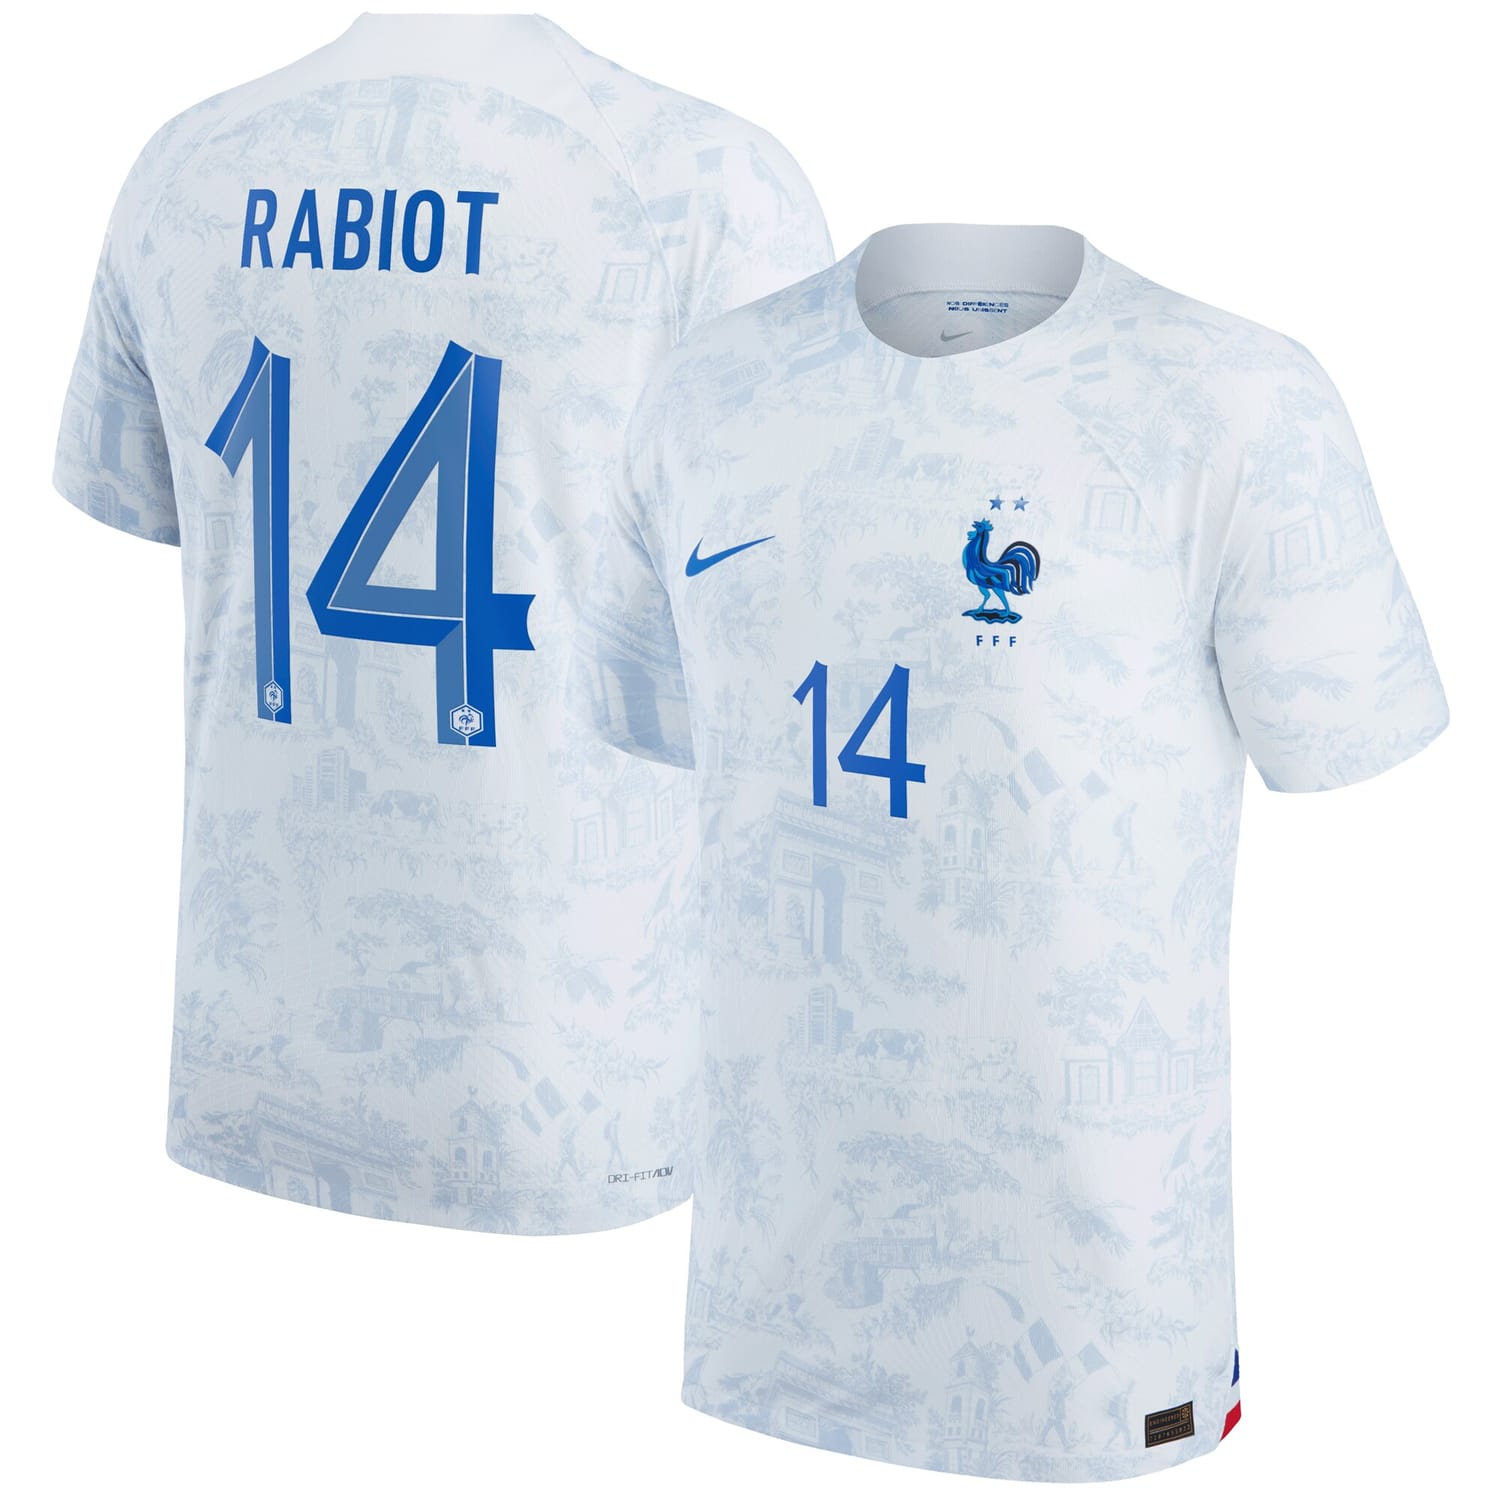 France National Team Away Authentic Jersey Shirt 2022 player Adrien Rabiot 14 printing for Men